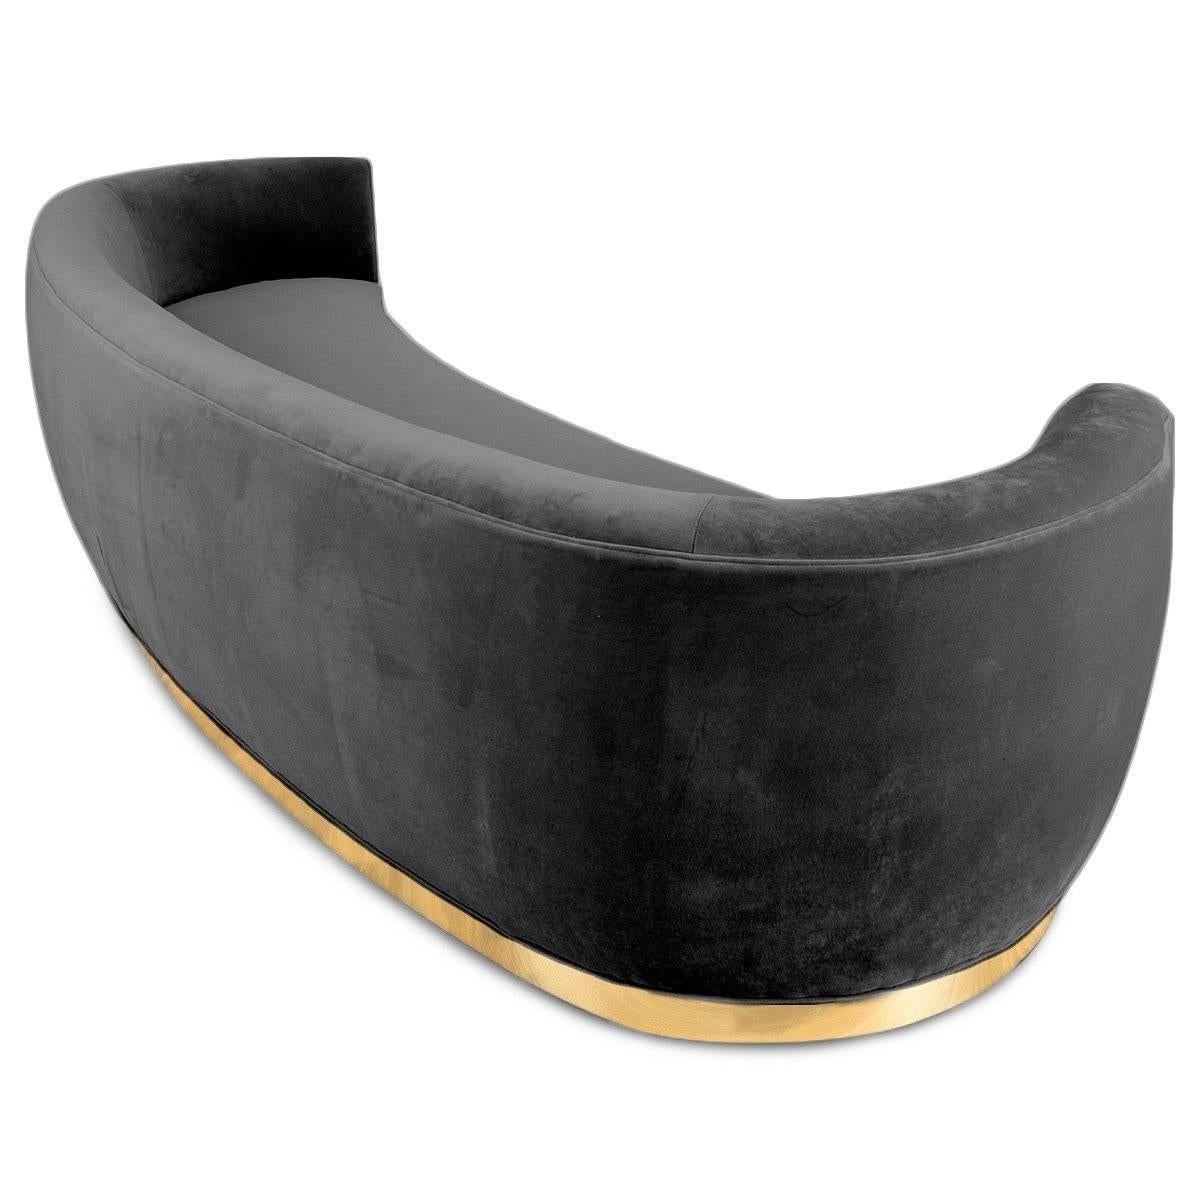 Art Deco Style St. Germain Curved Sofa in Velvet with Brass Toe-kick Base - 9 ft For Sale 9